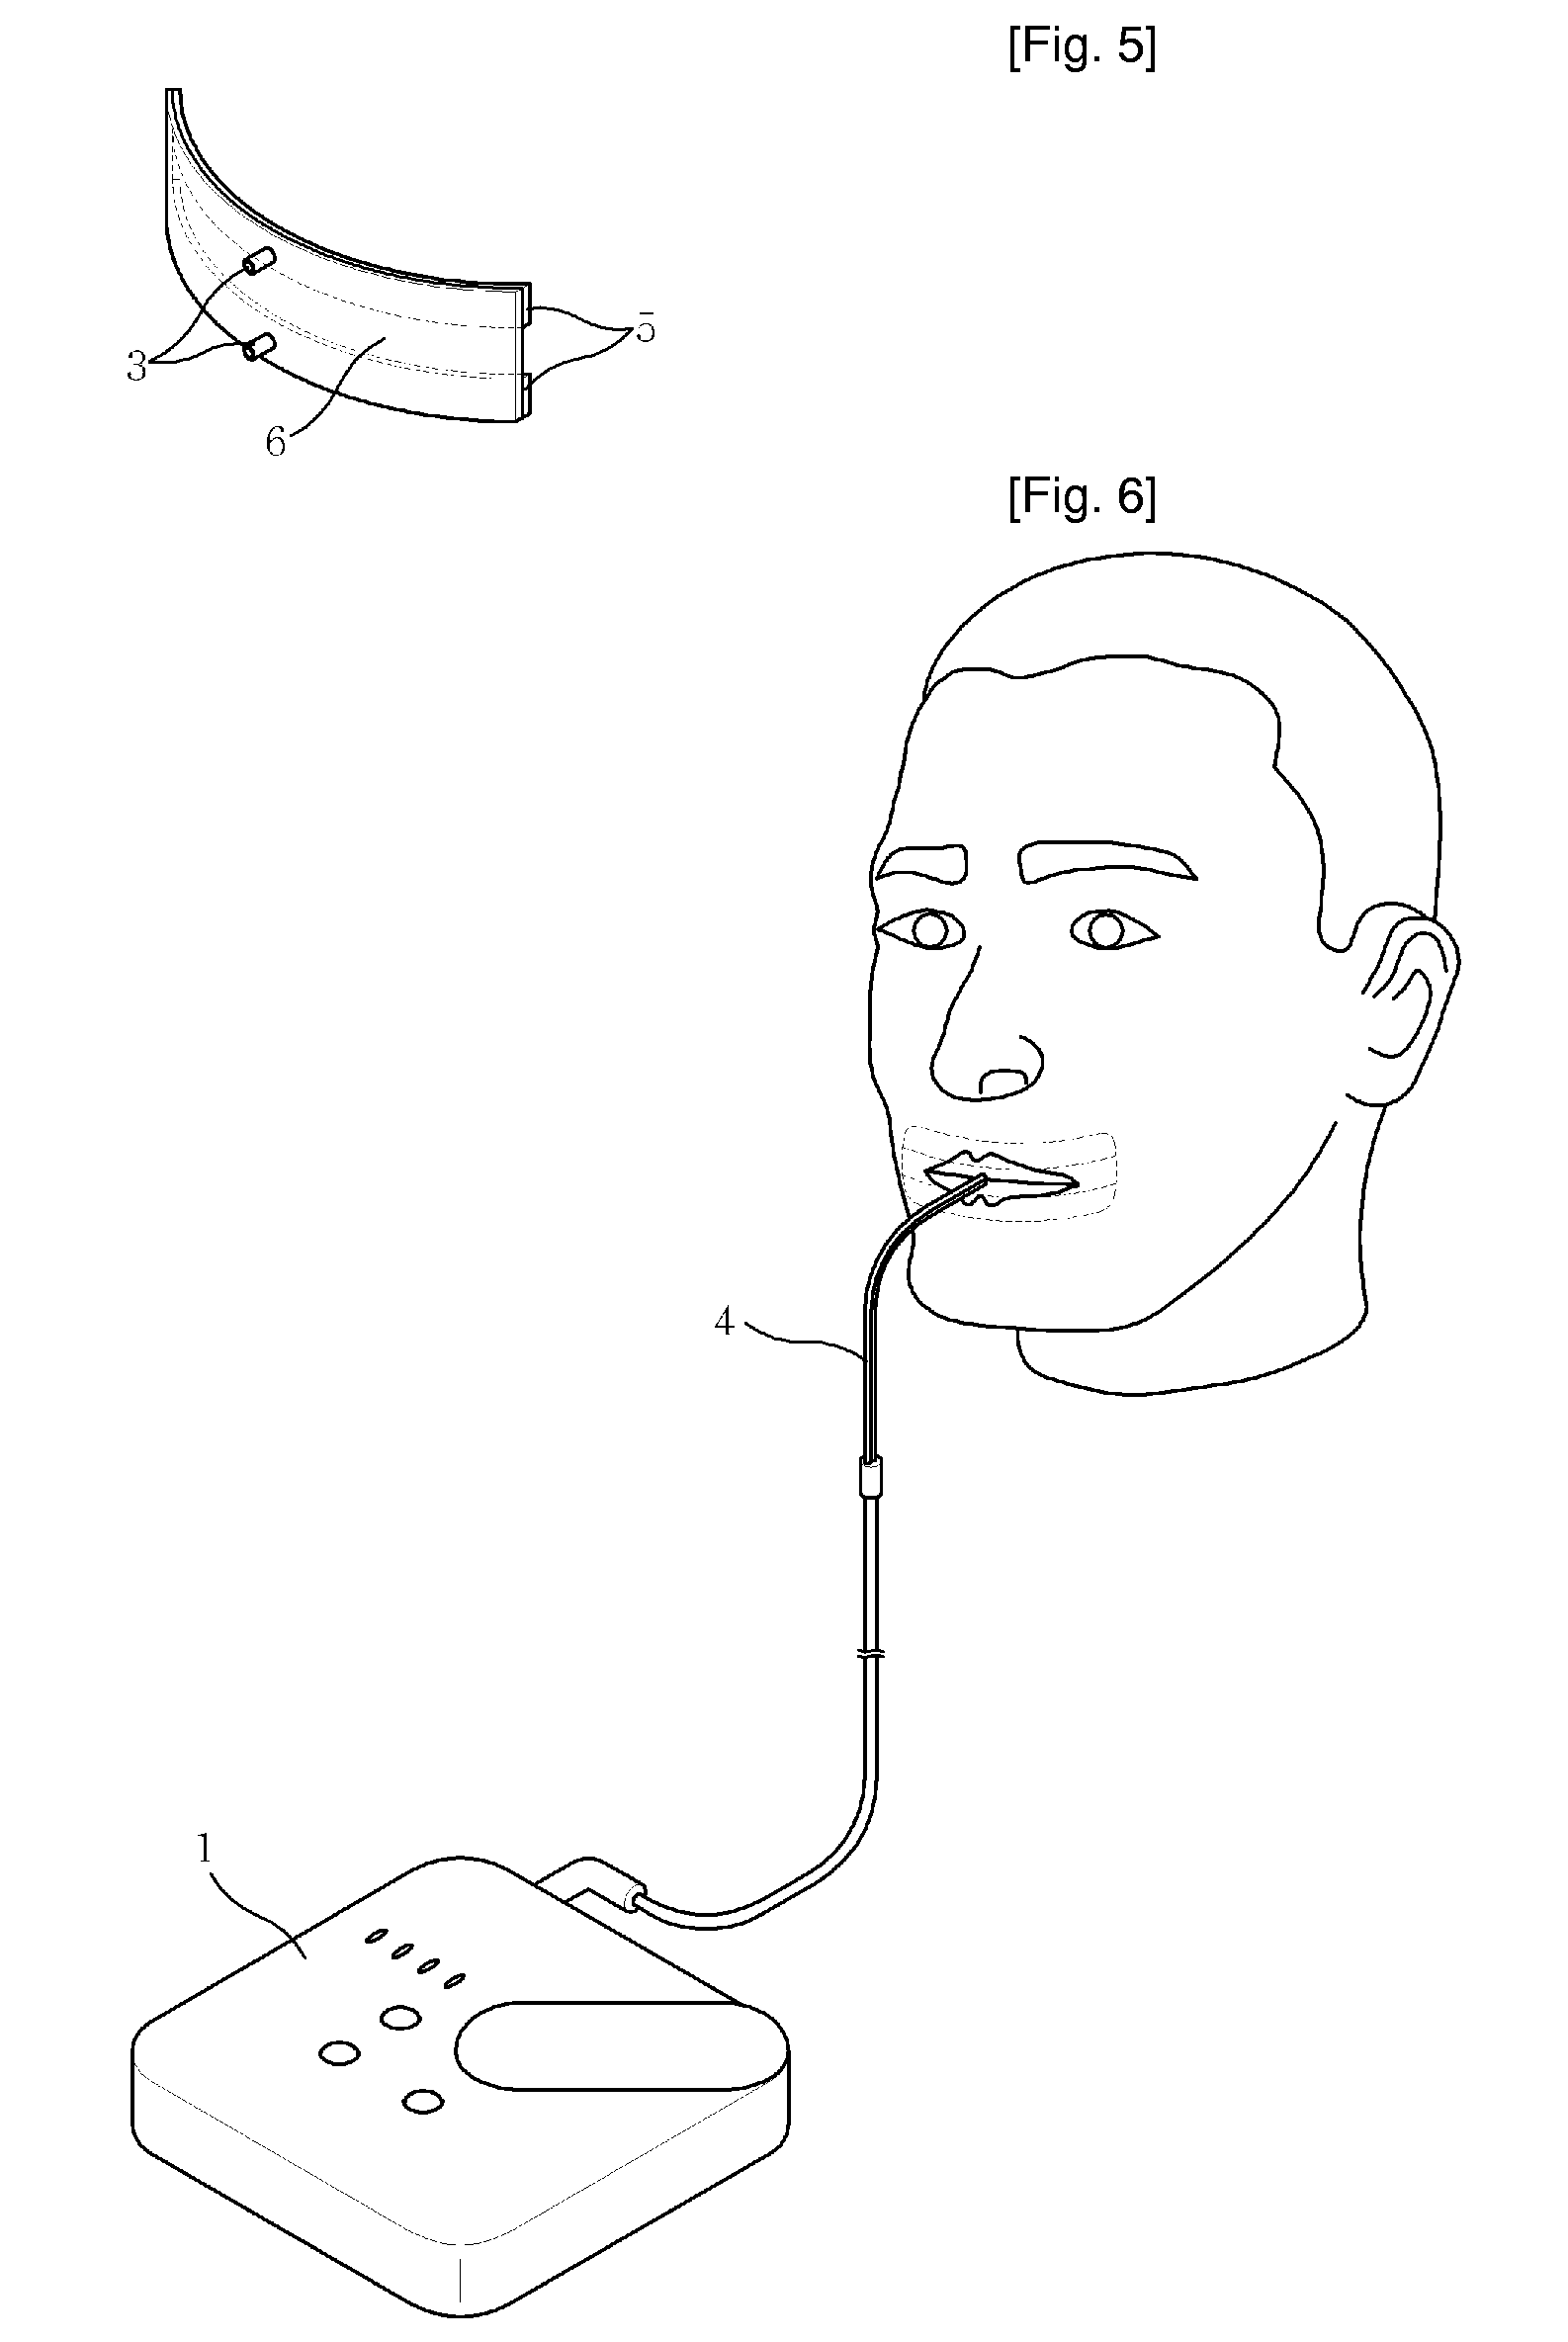 Device for Stimulating Gum Using Low Frequency